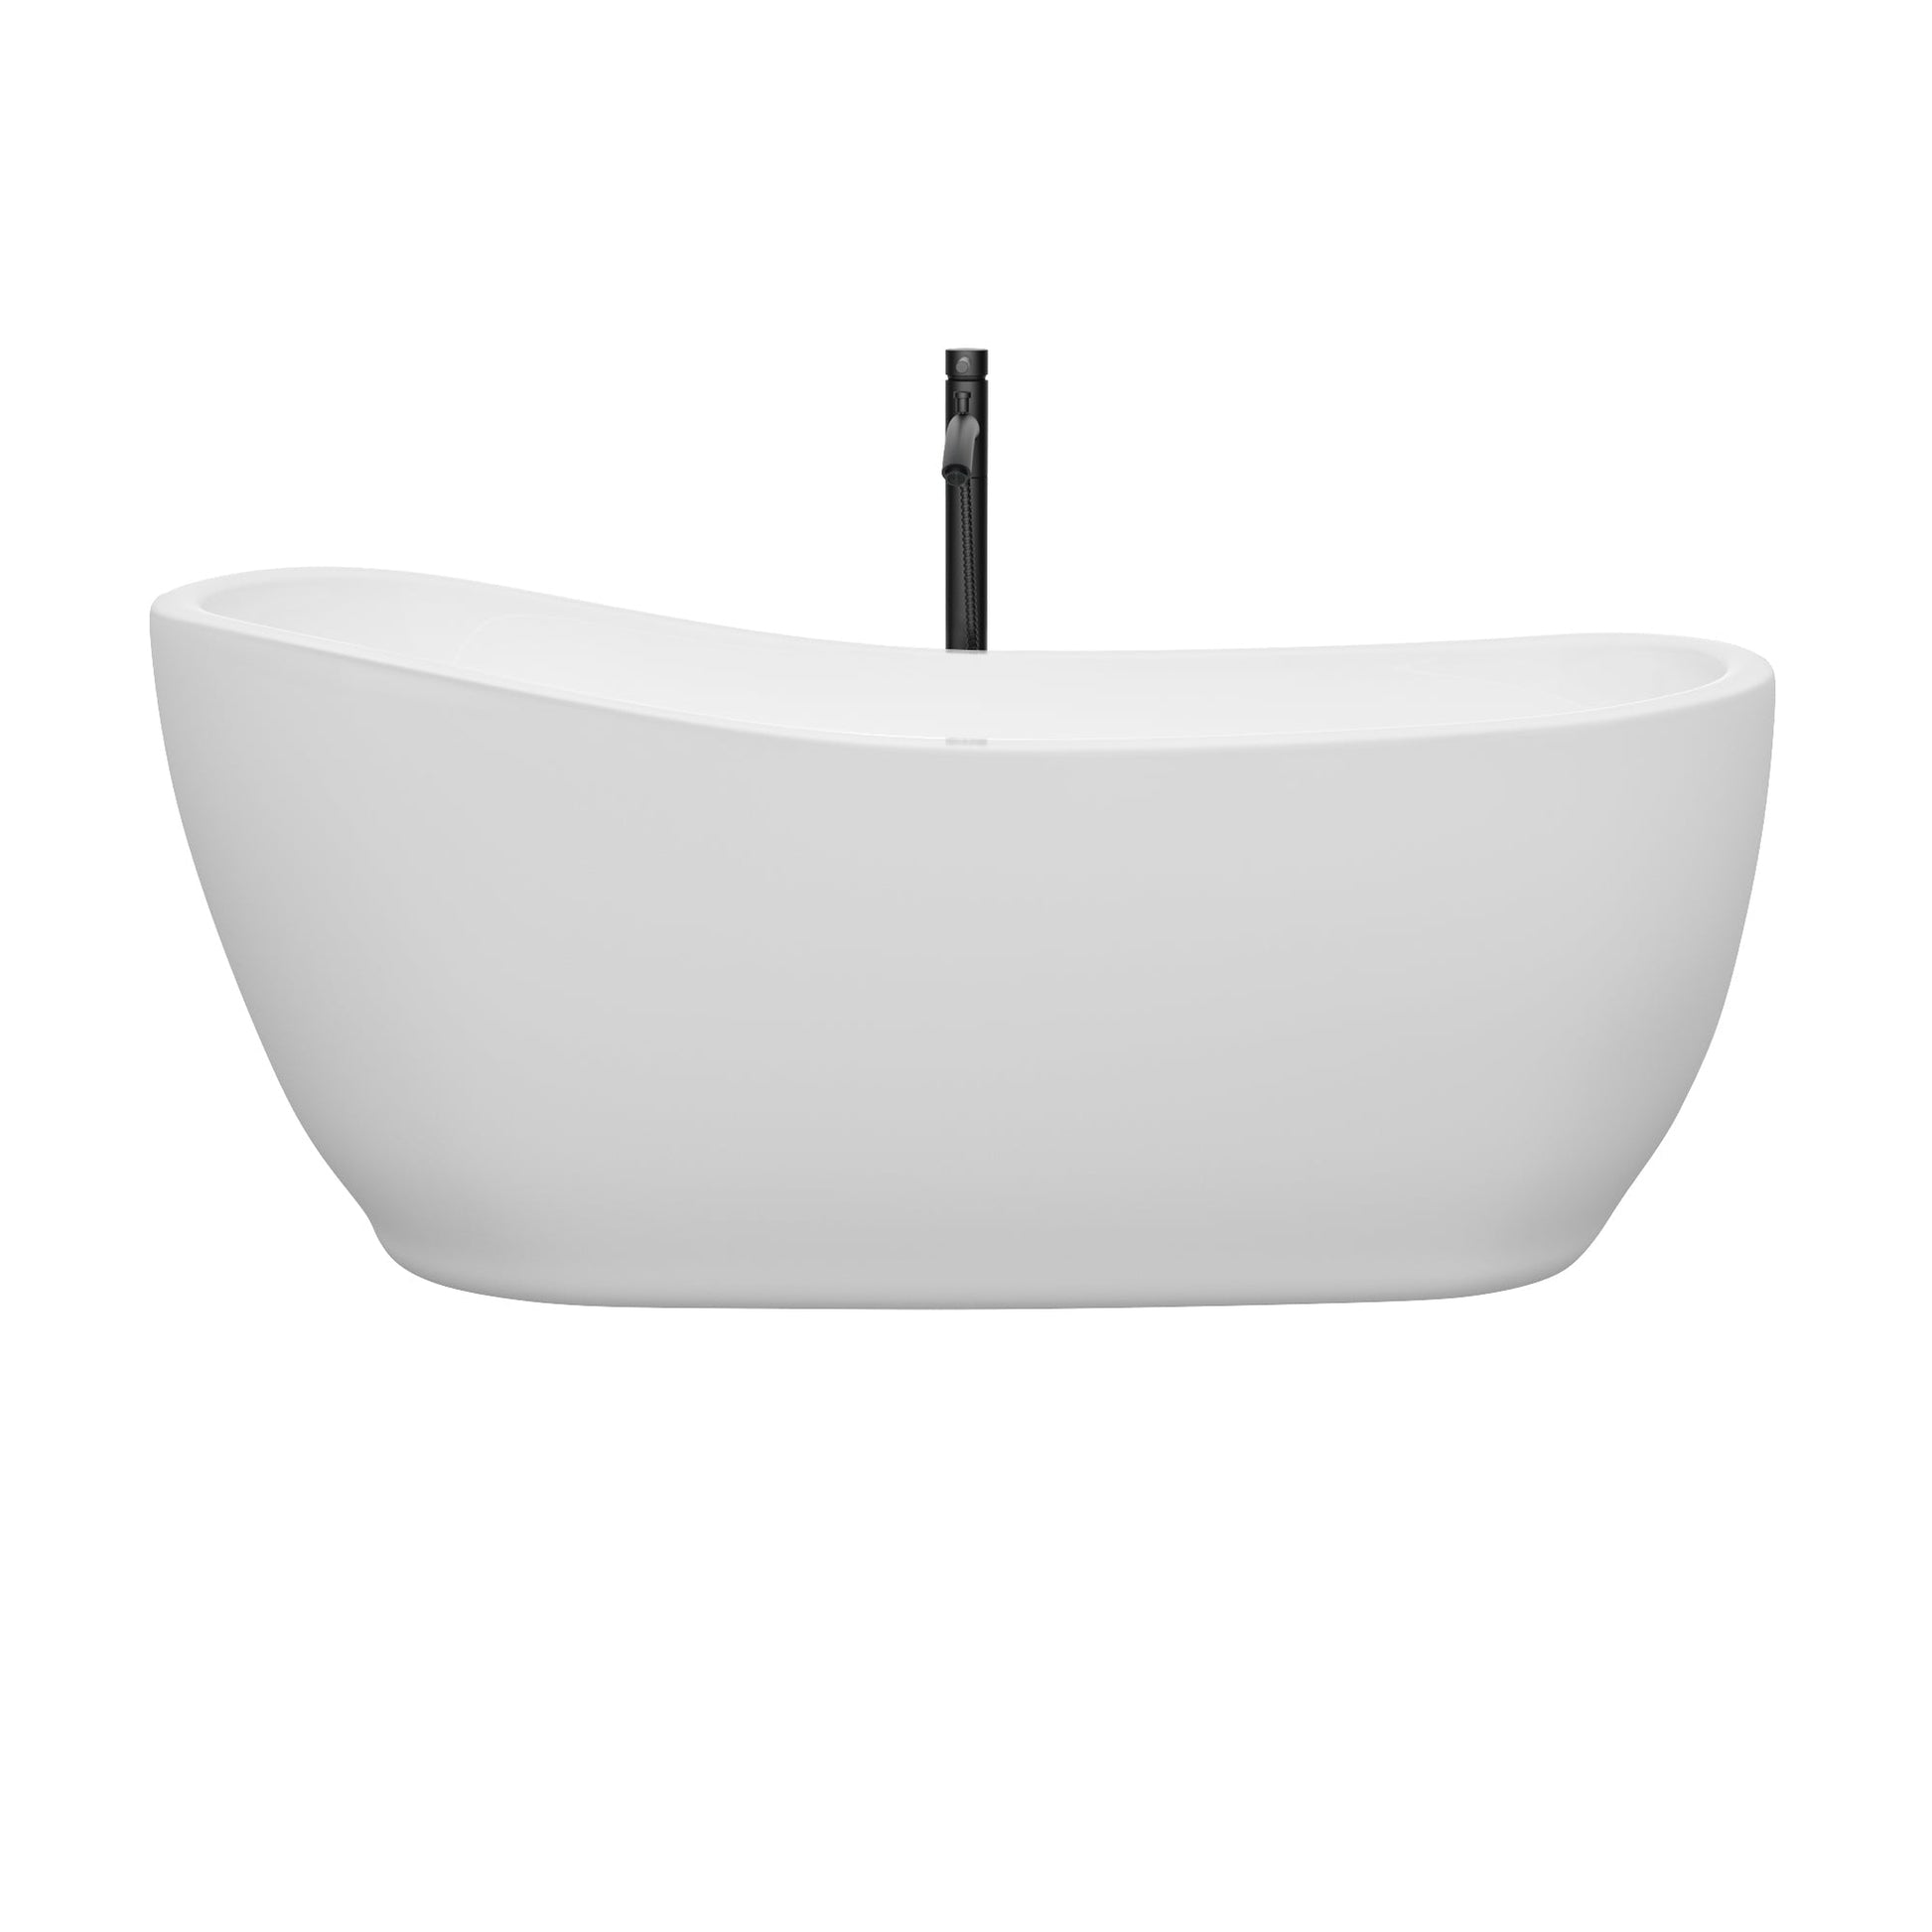 Wyndham Collection Margaret 66" Freestanding Bathtub in White With Polished Chrome Trim and Floor Mounted Faucet in Matte Black